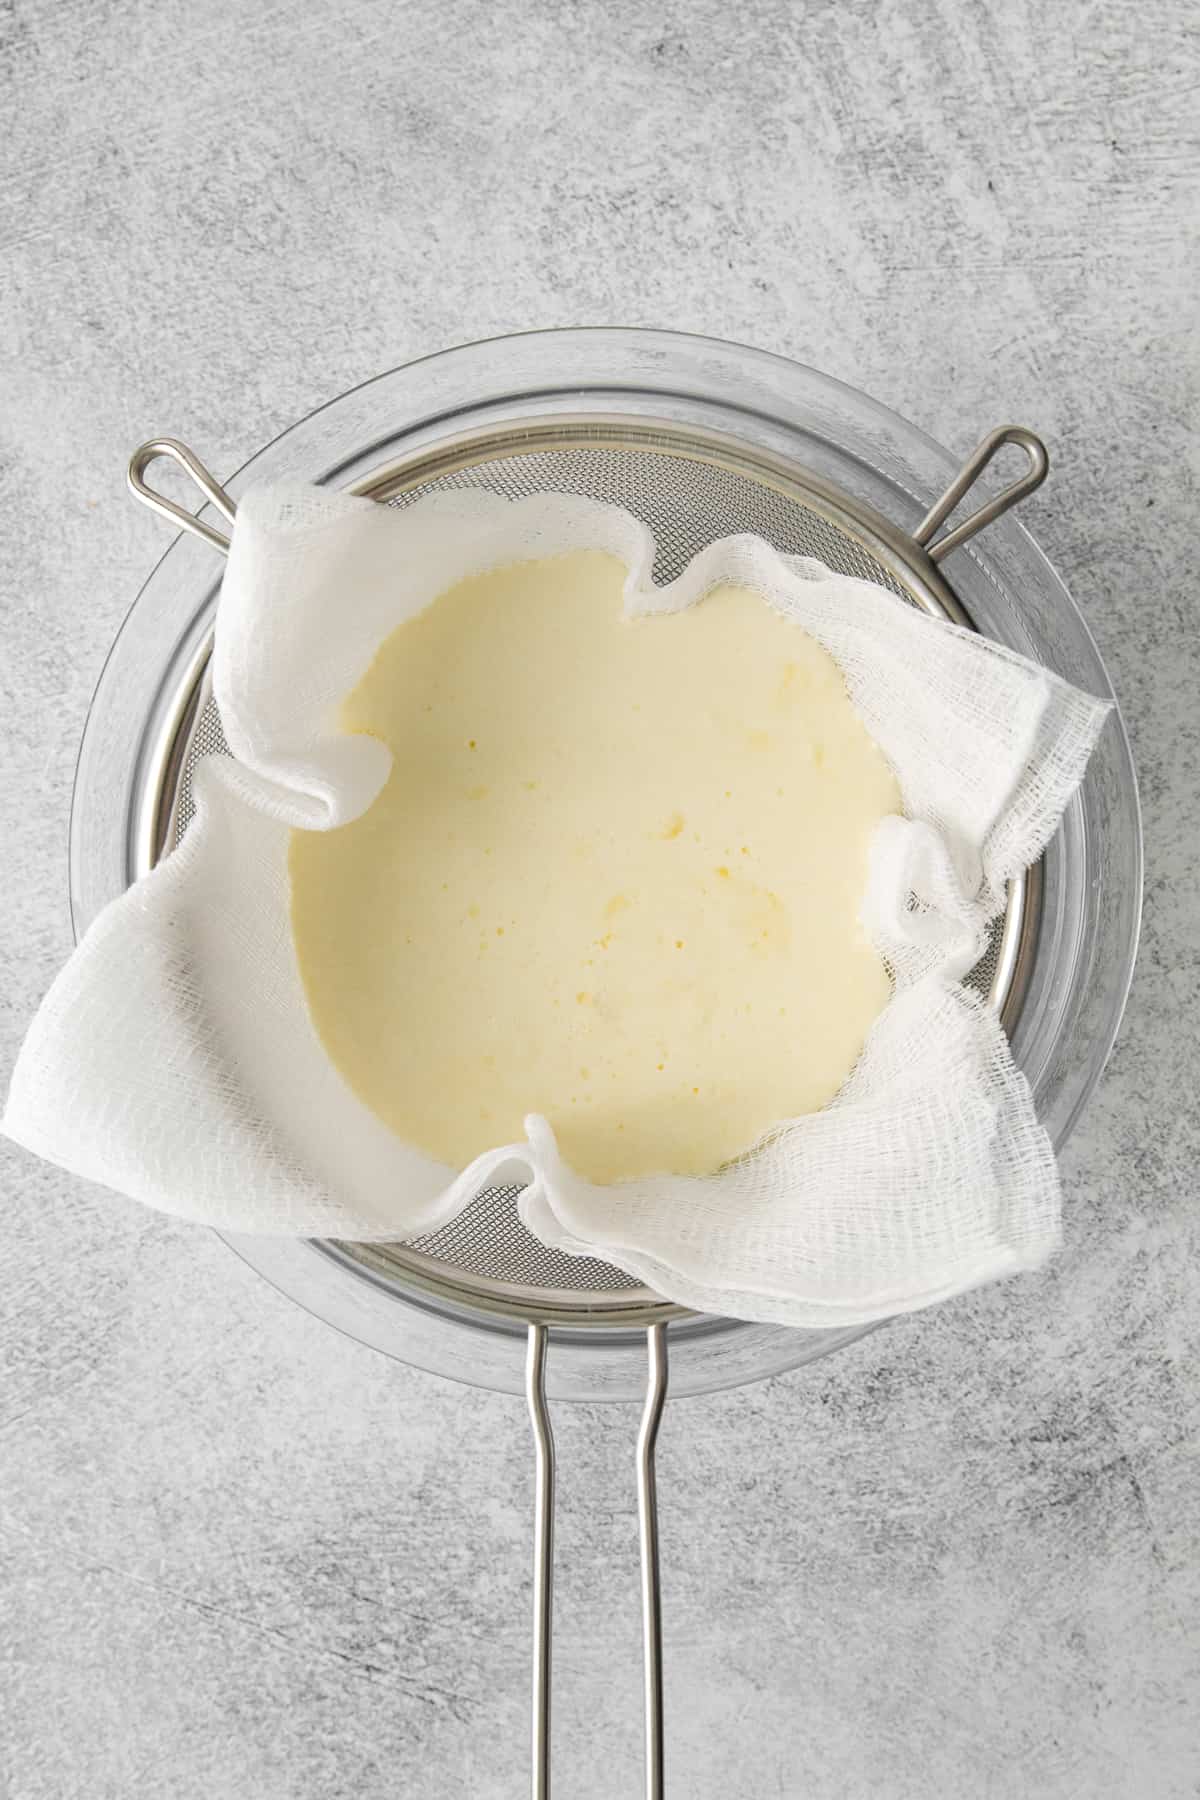 Mascarpone cheese in a cheesecloth.